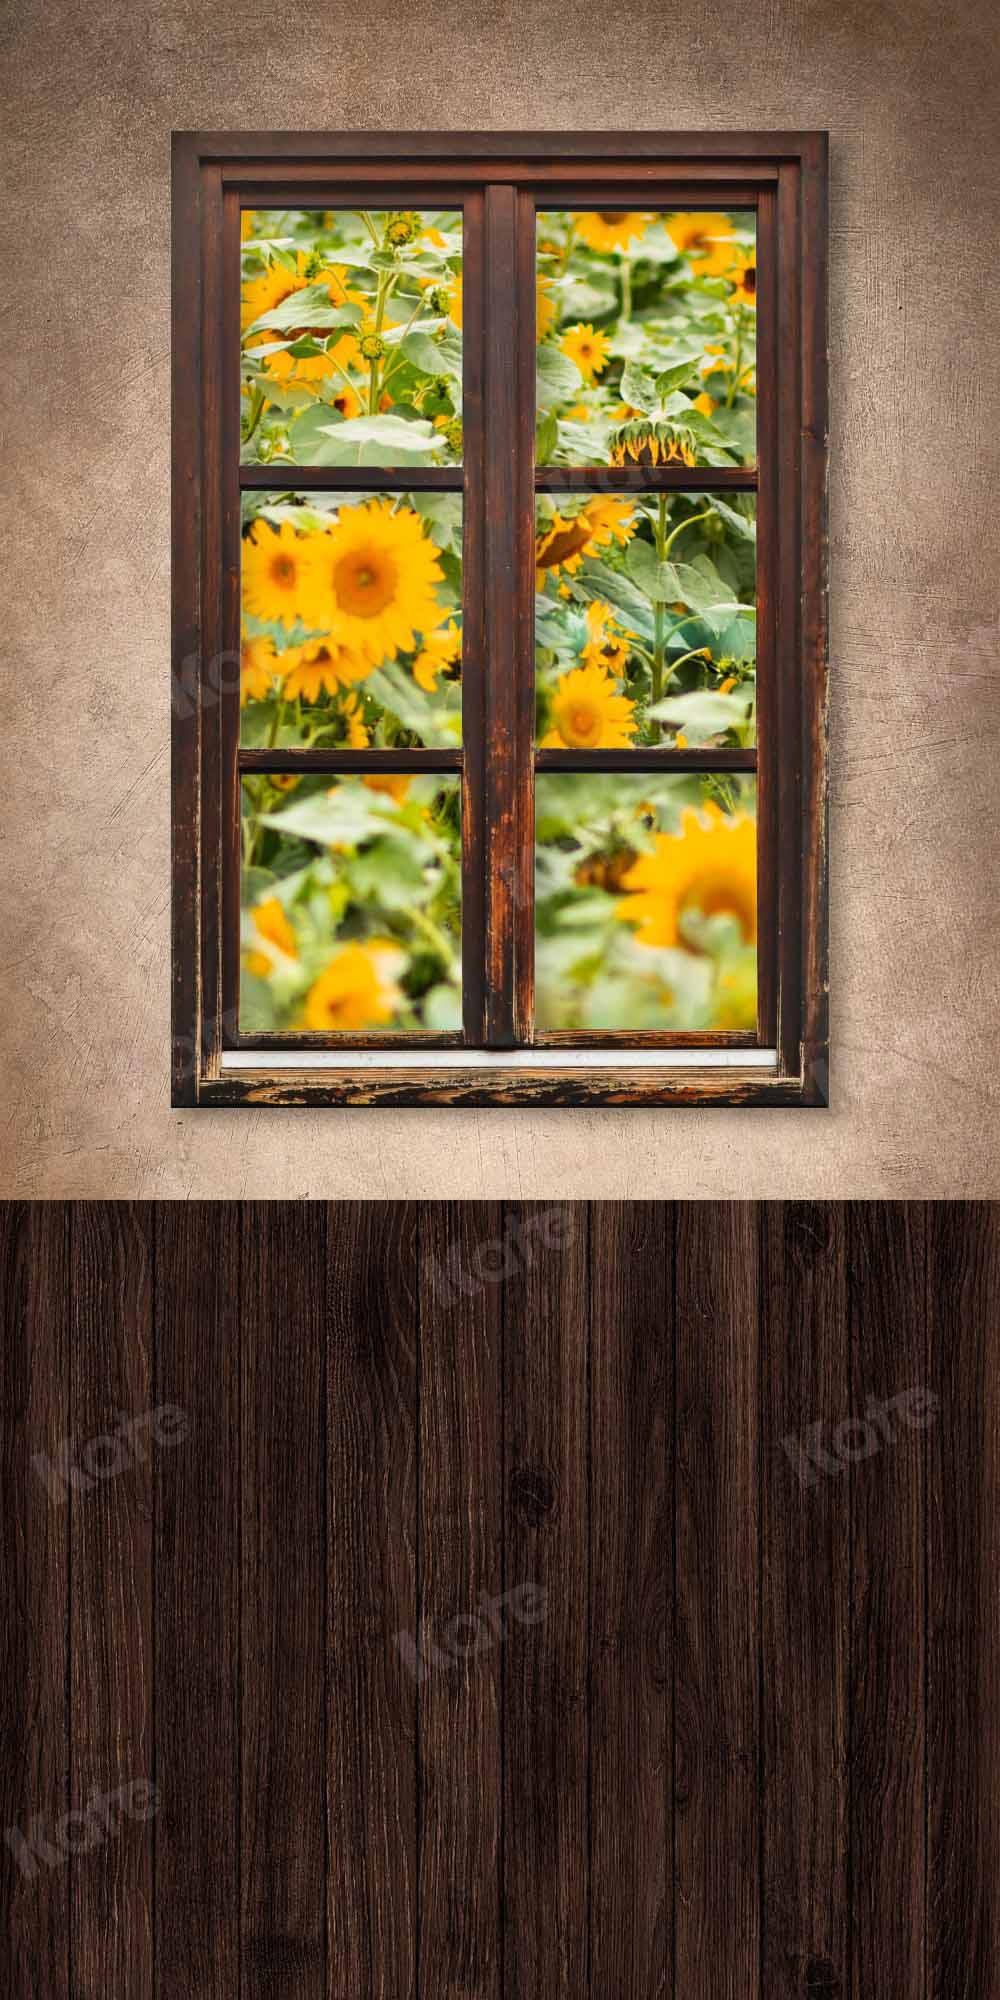 Kate Sweep Sunflower Backdrop Abstract Wood Board Stitching Designed by Chain Photographer